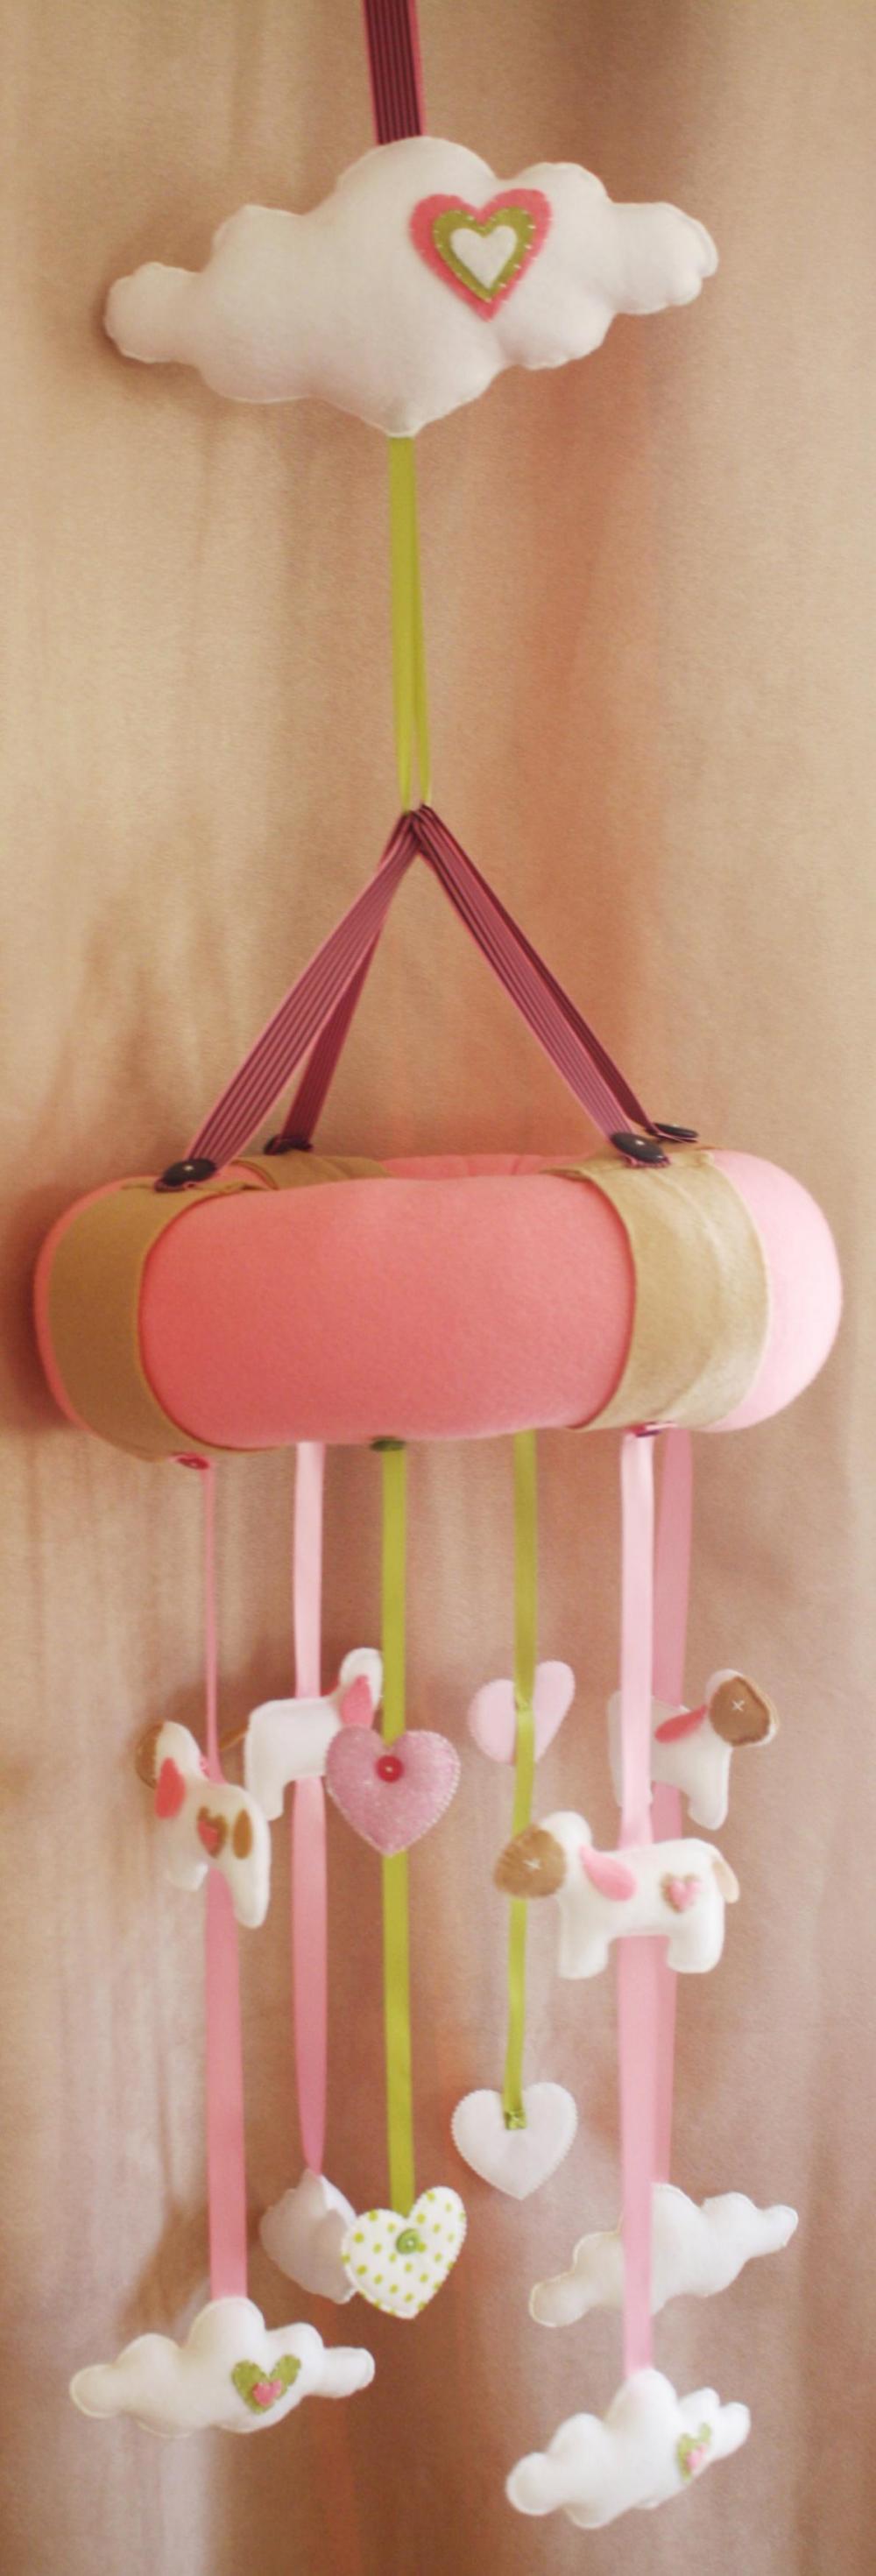 Boo!beloobie Little Lamb Baby Mobile In Pink, Lime Green, White And Cream In A Farmyard Style For Girls